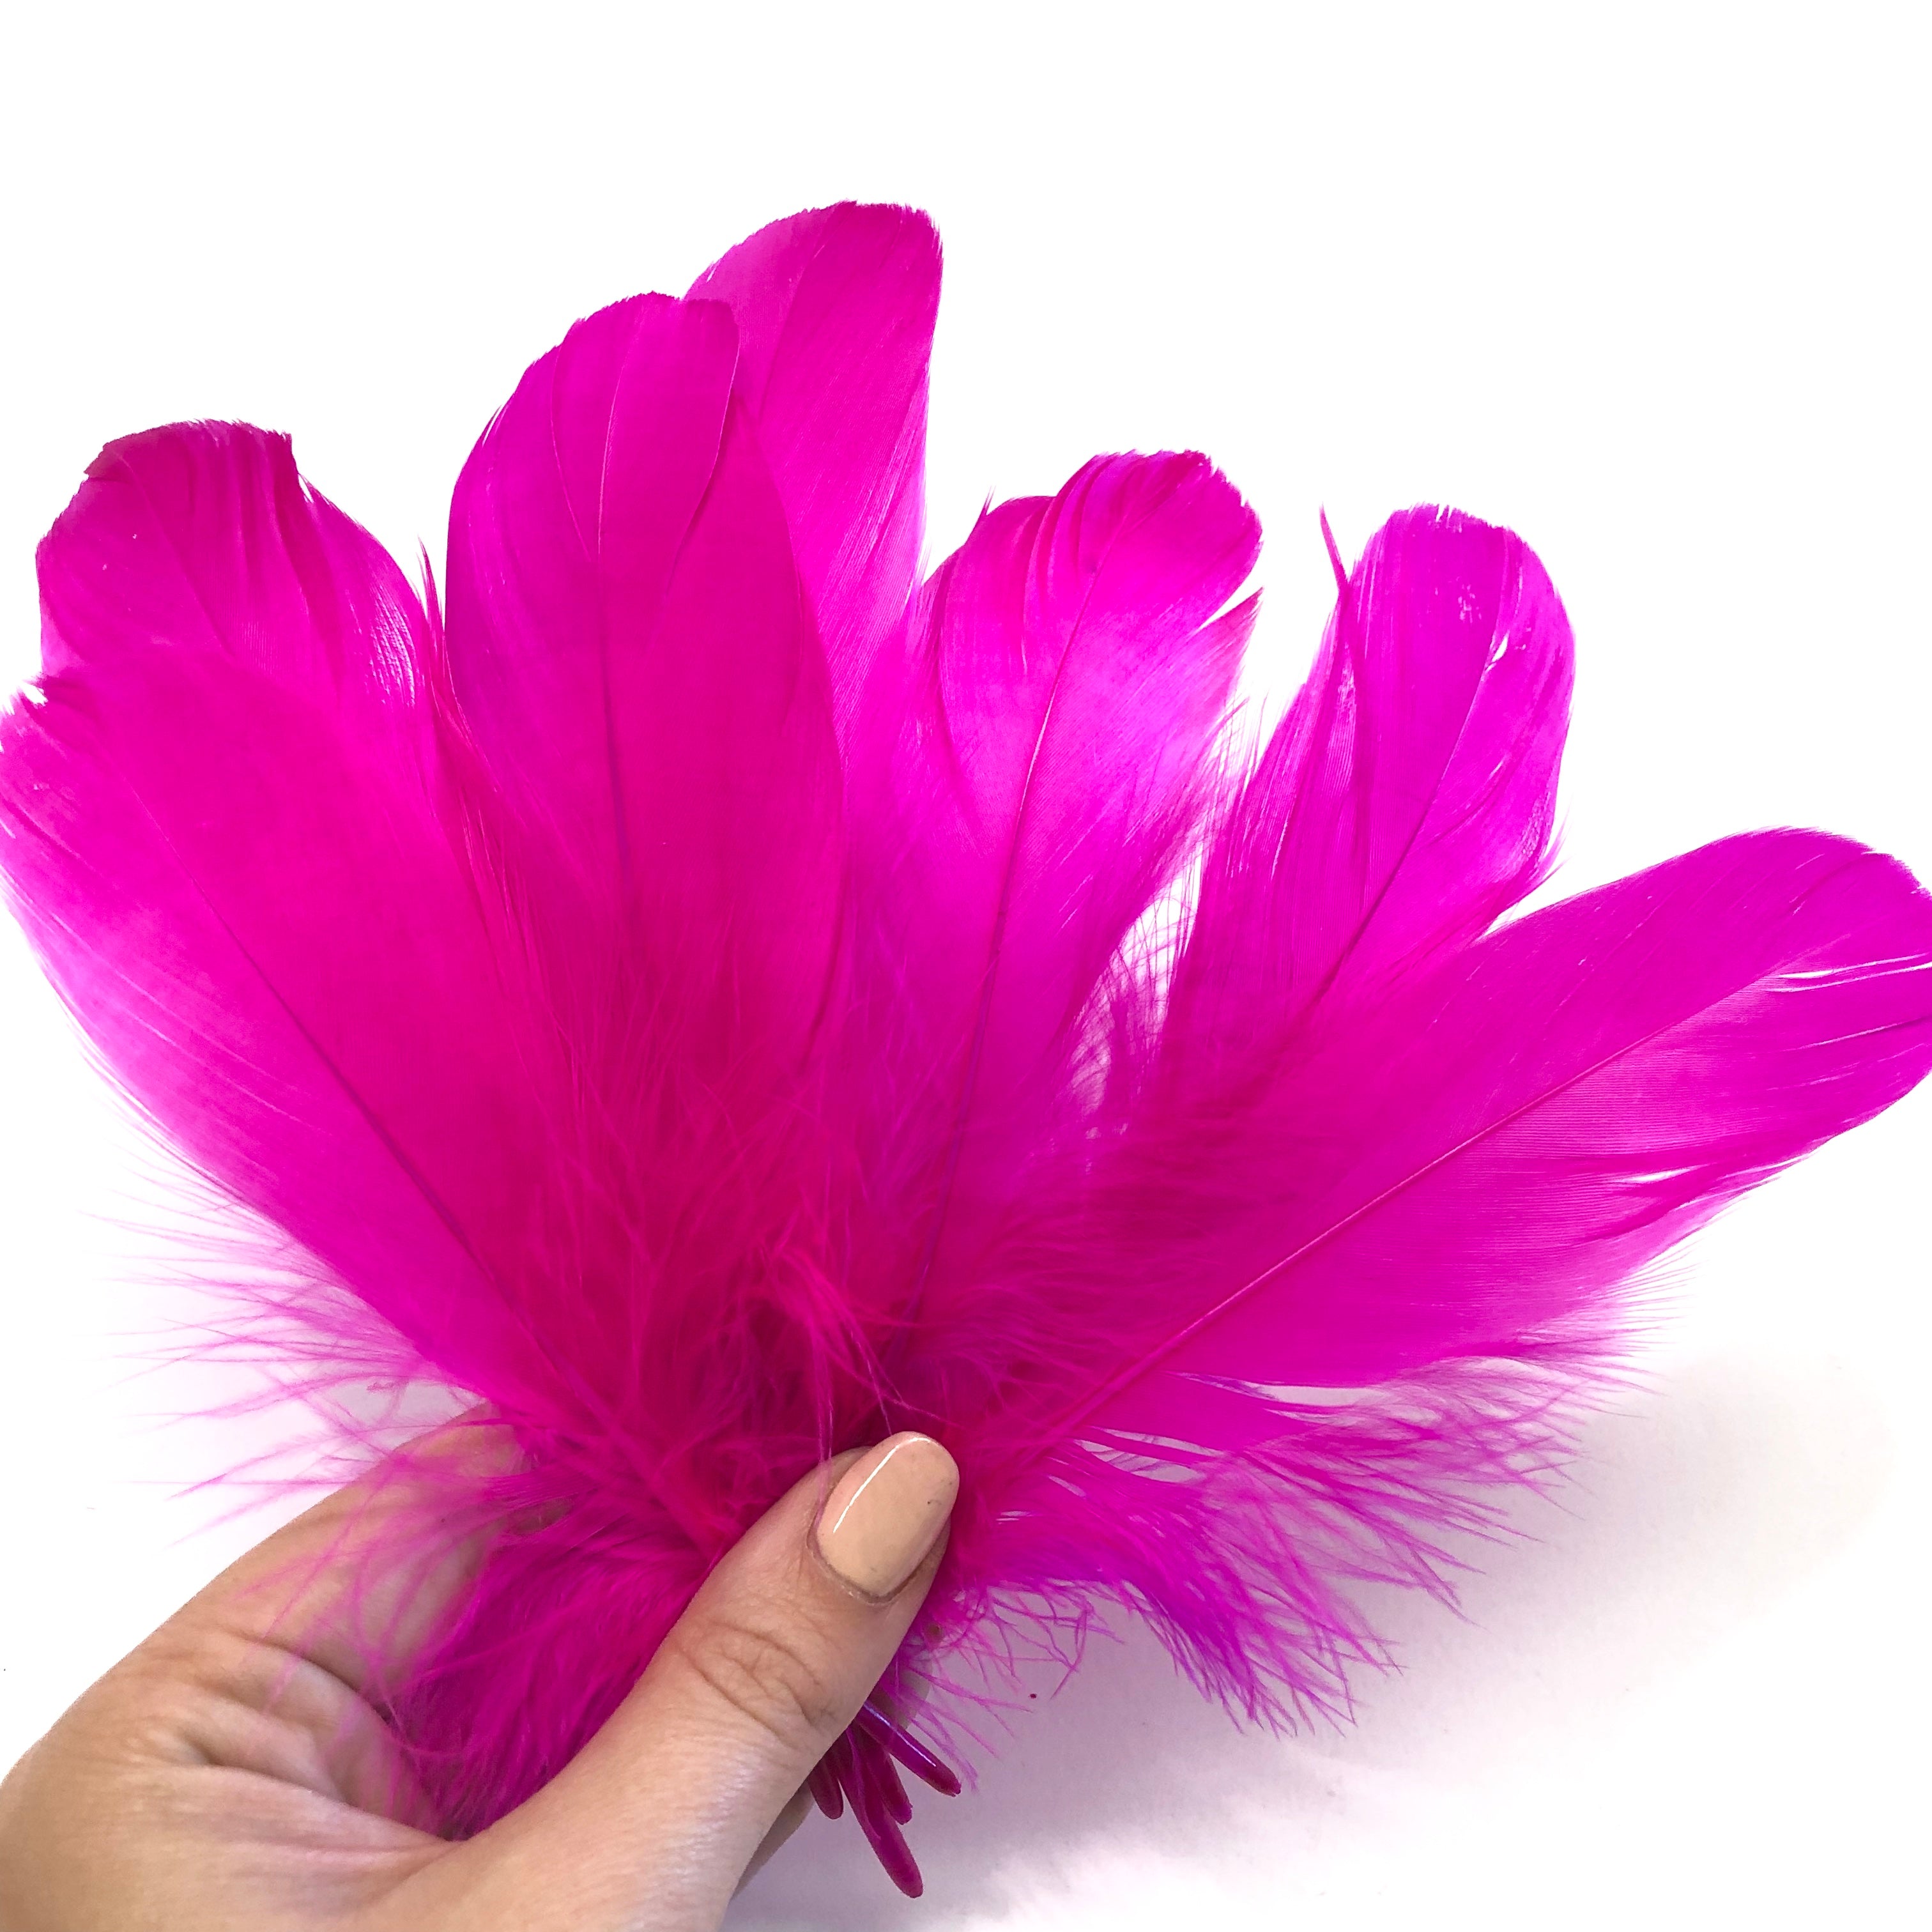 Goose Nagoire Feathers 10 grams - Cerise